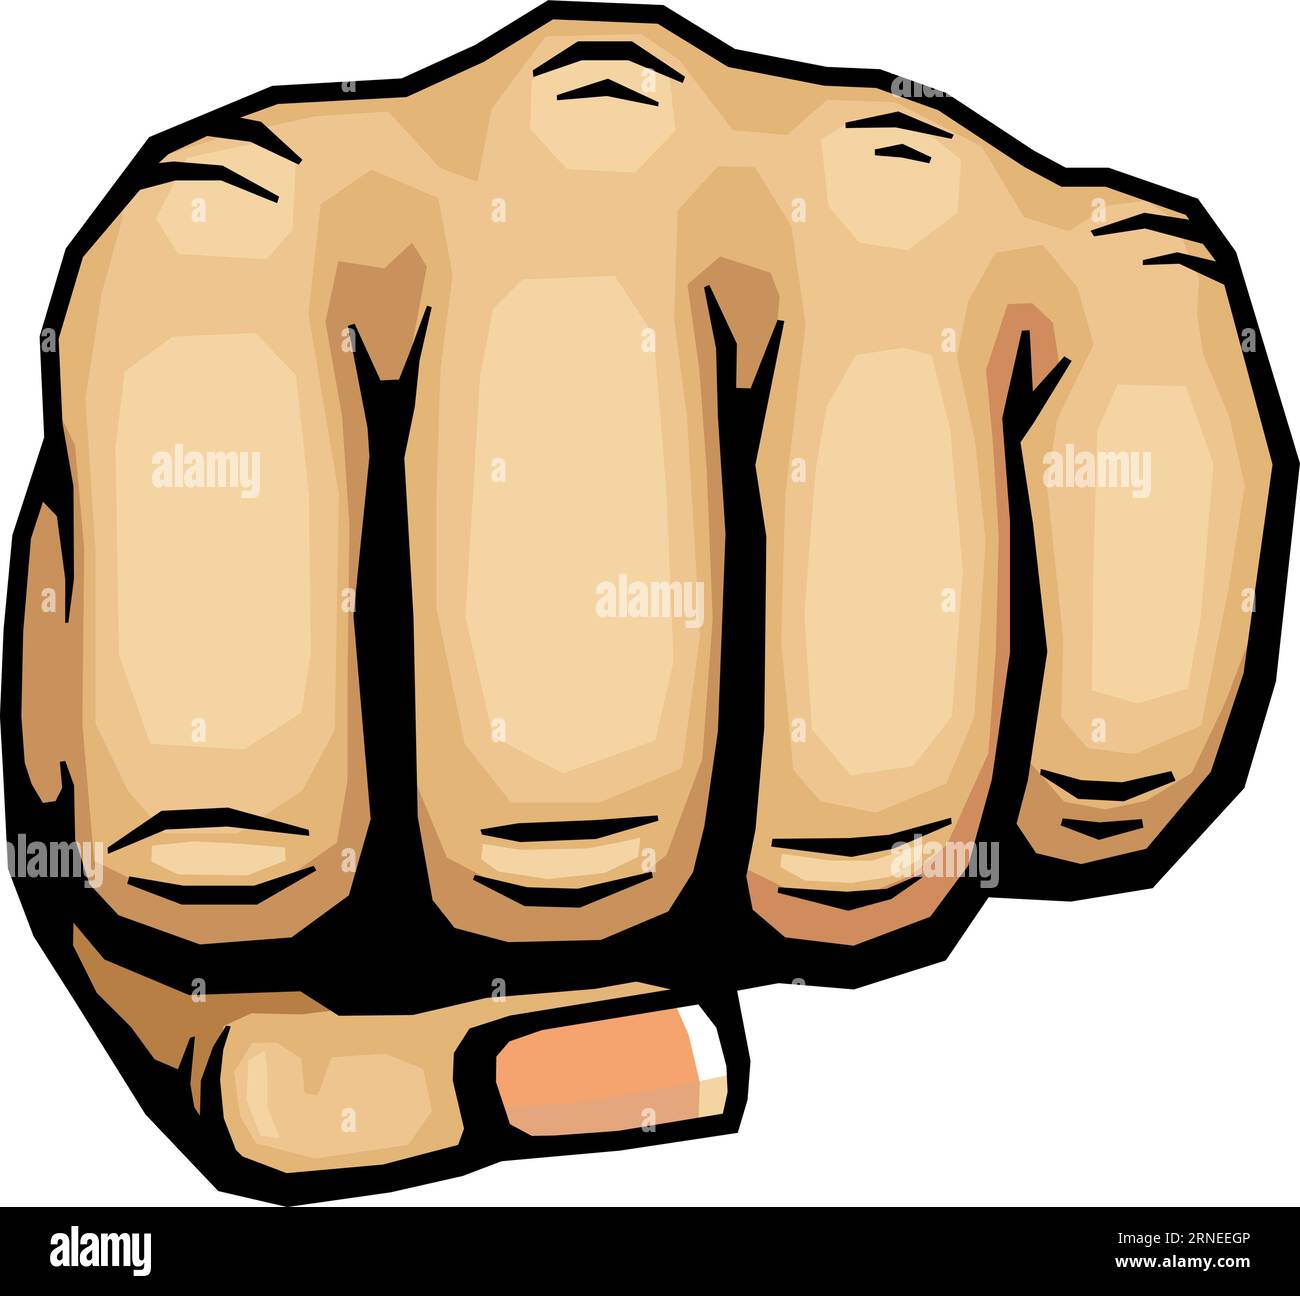 Fighting fist emblem. Uprising color icon. Power sign Stock Vector